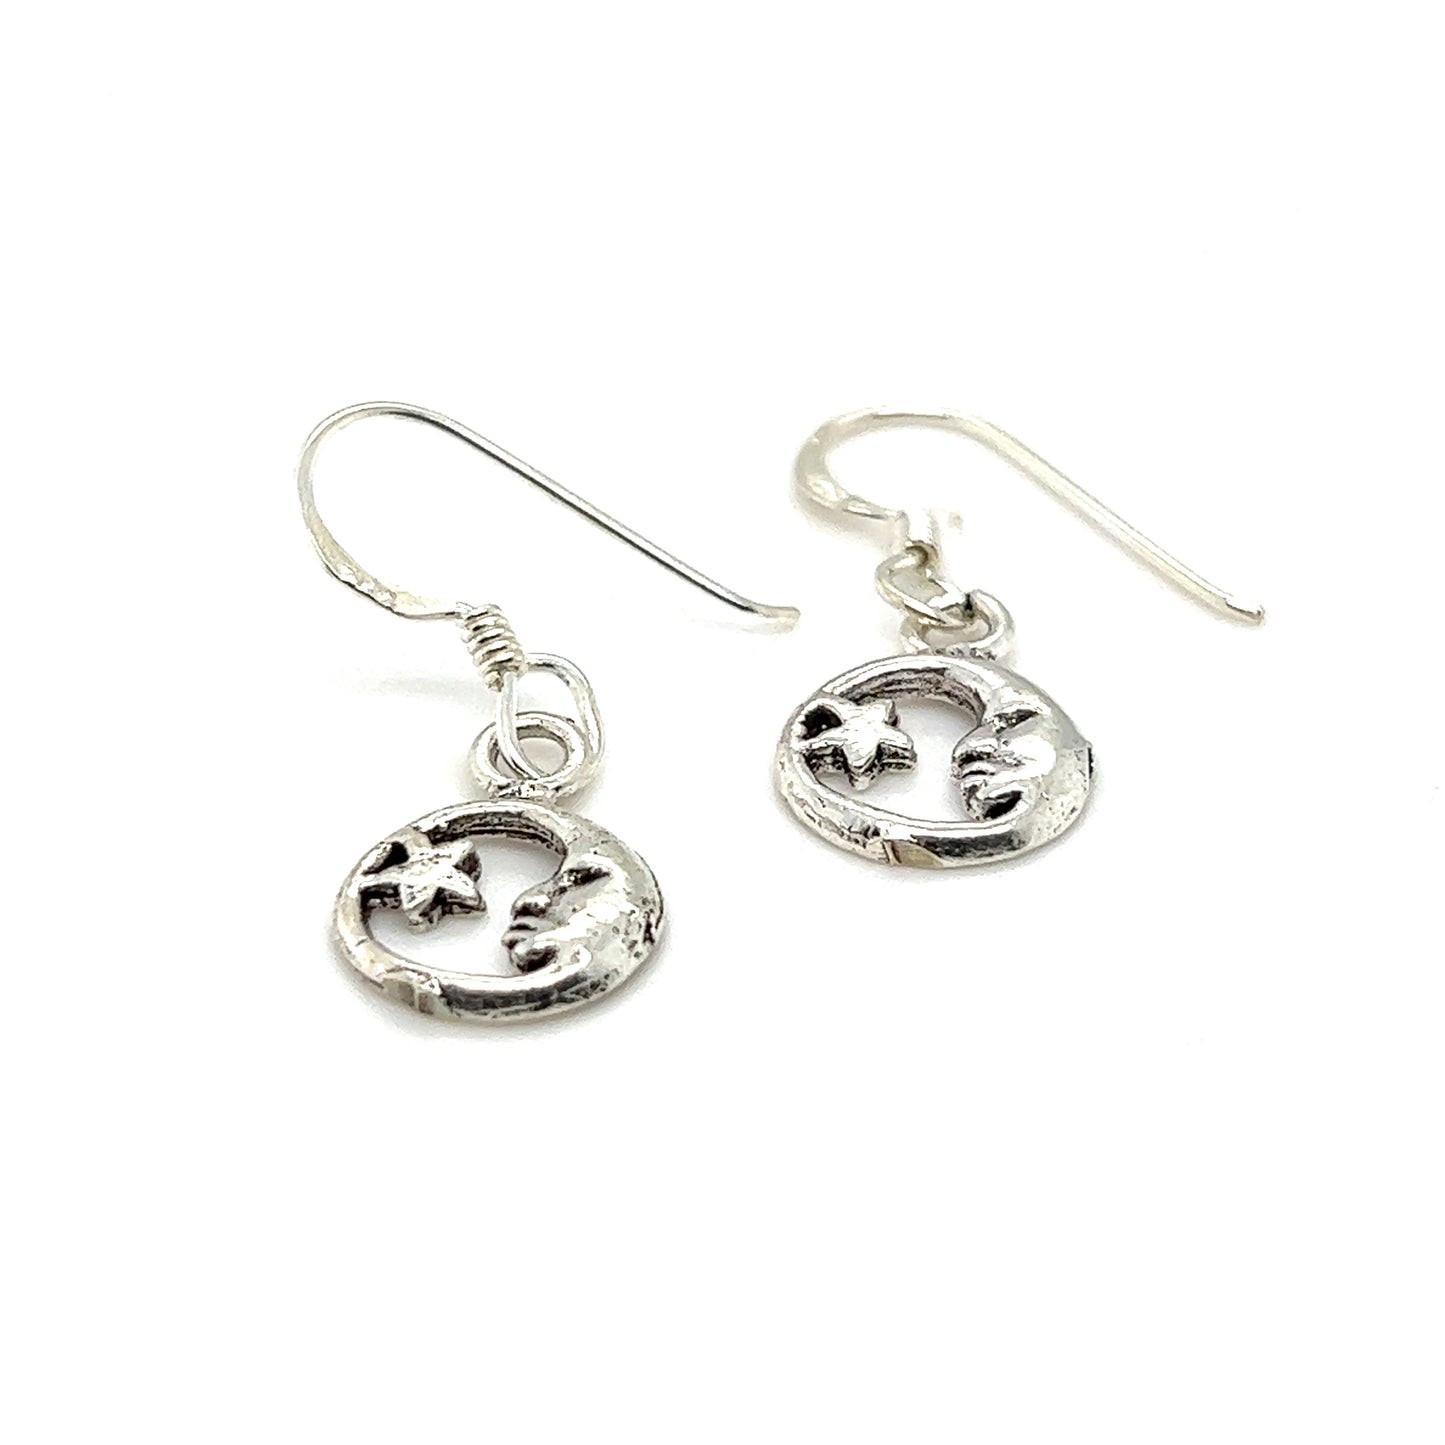 A pair of Dainty Crescent Moon and Star Earrings from Super Silver.